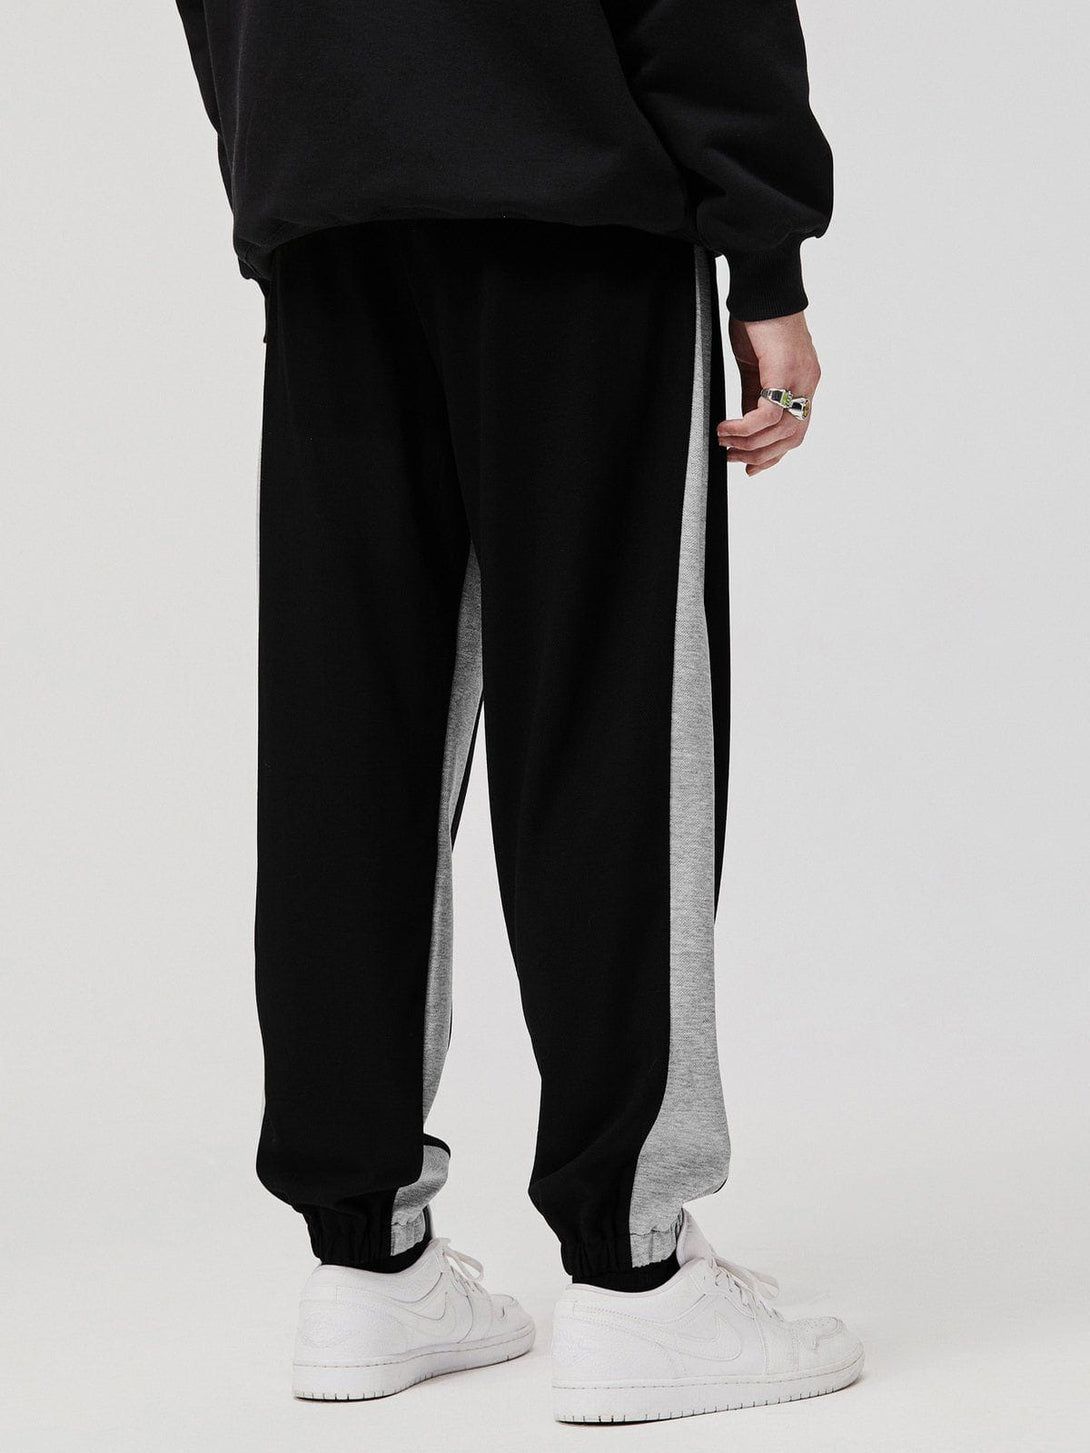 Levefly - Contrast Casual Sweatpants - Streetwear Fashion - levefly.com